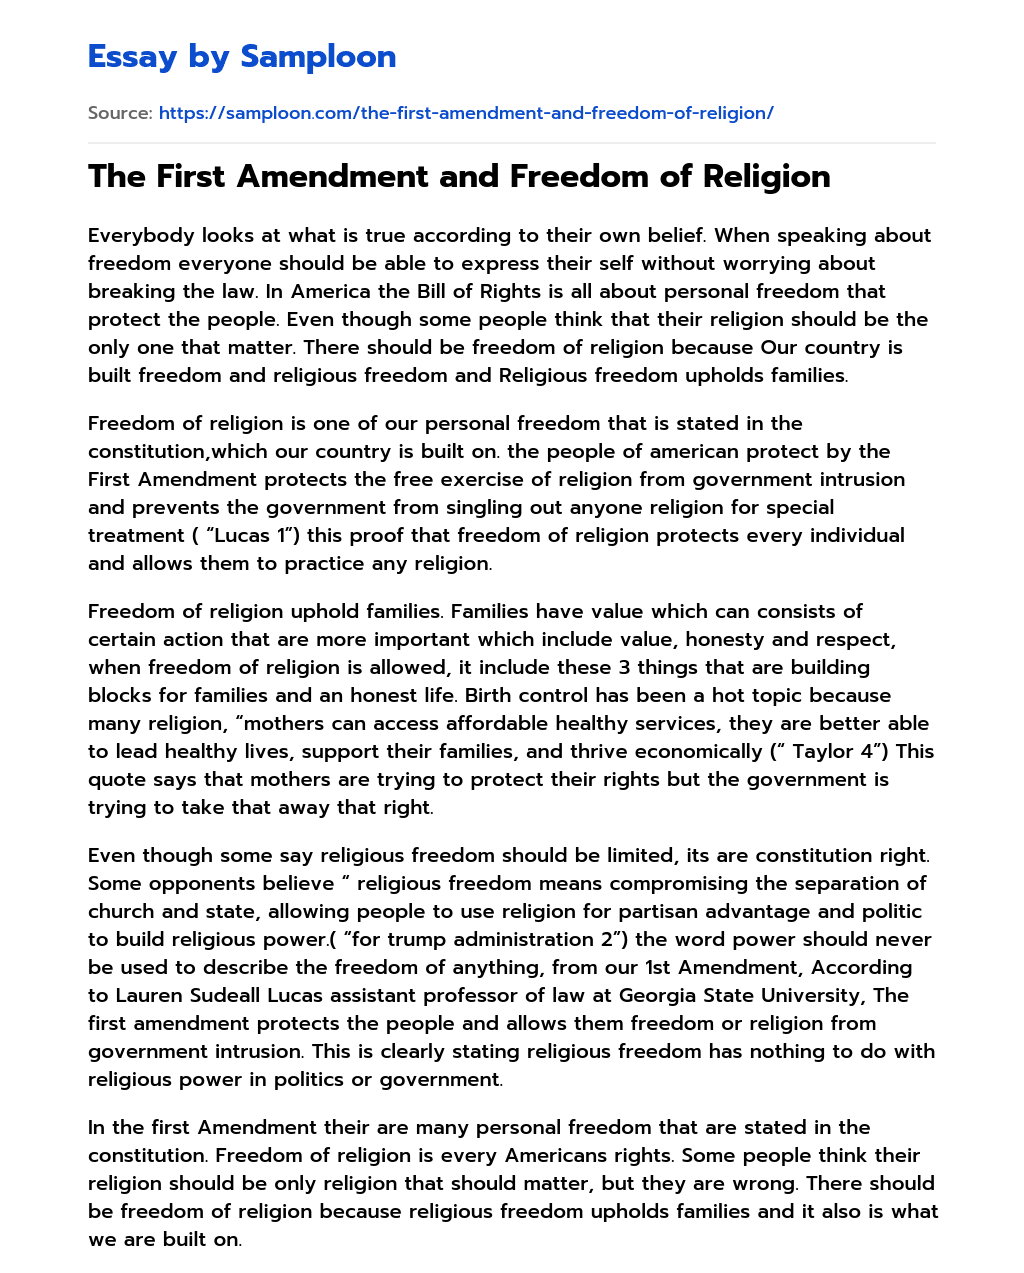 The First Amendment and Freedom of Religion essay